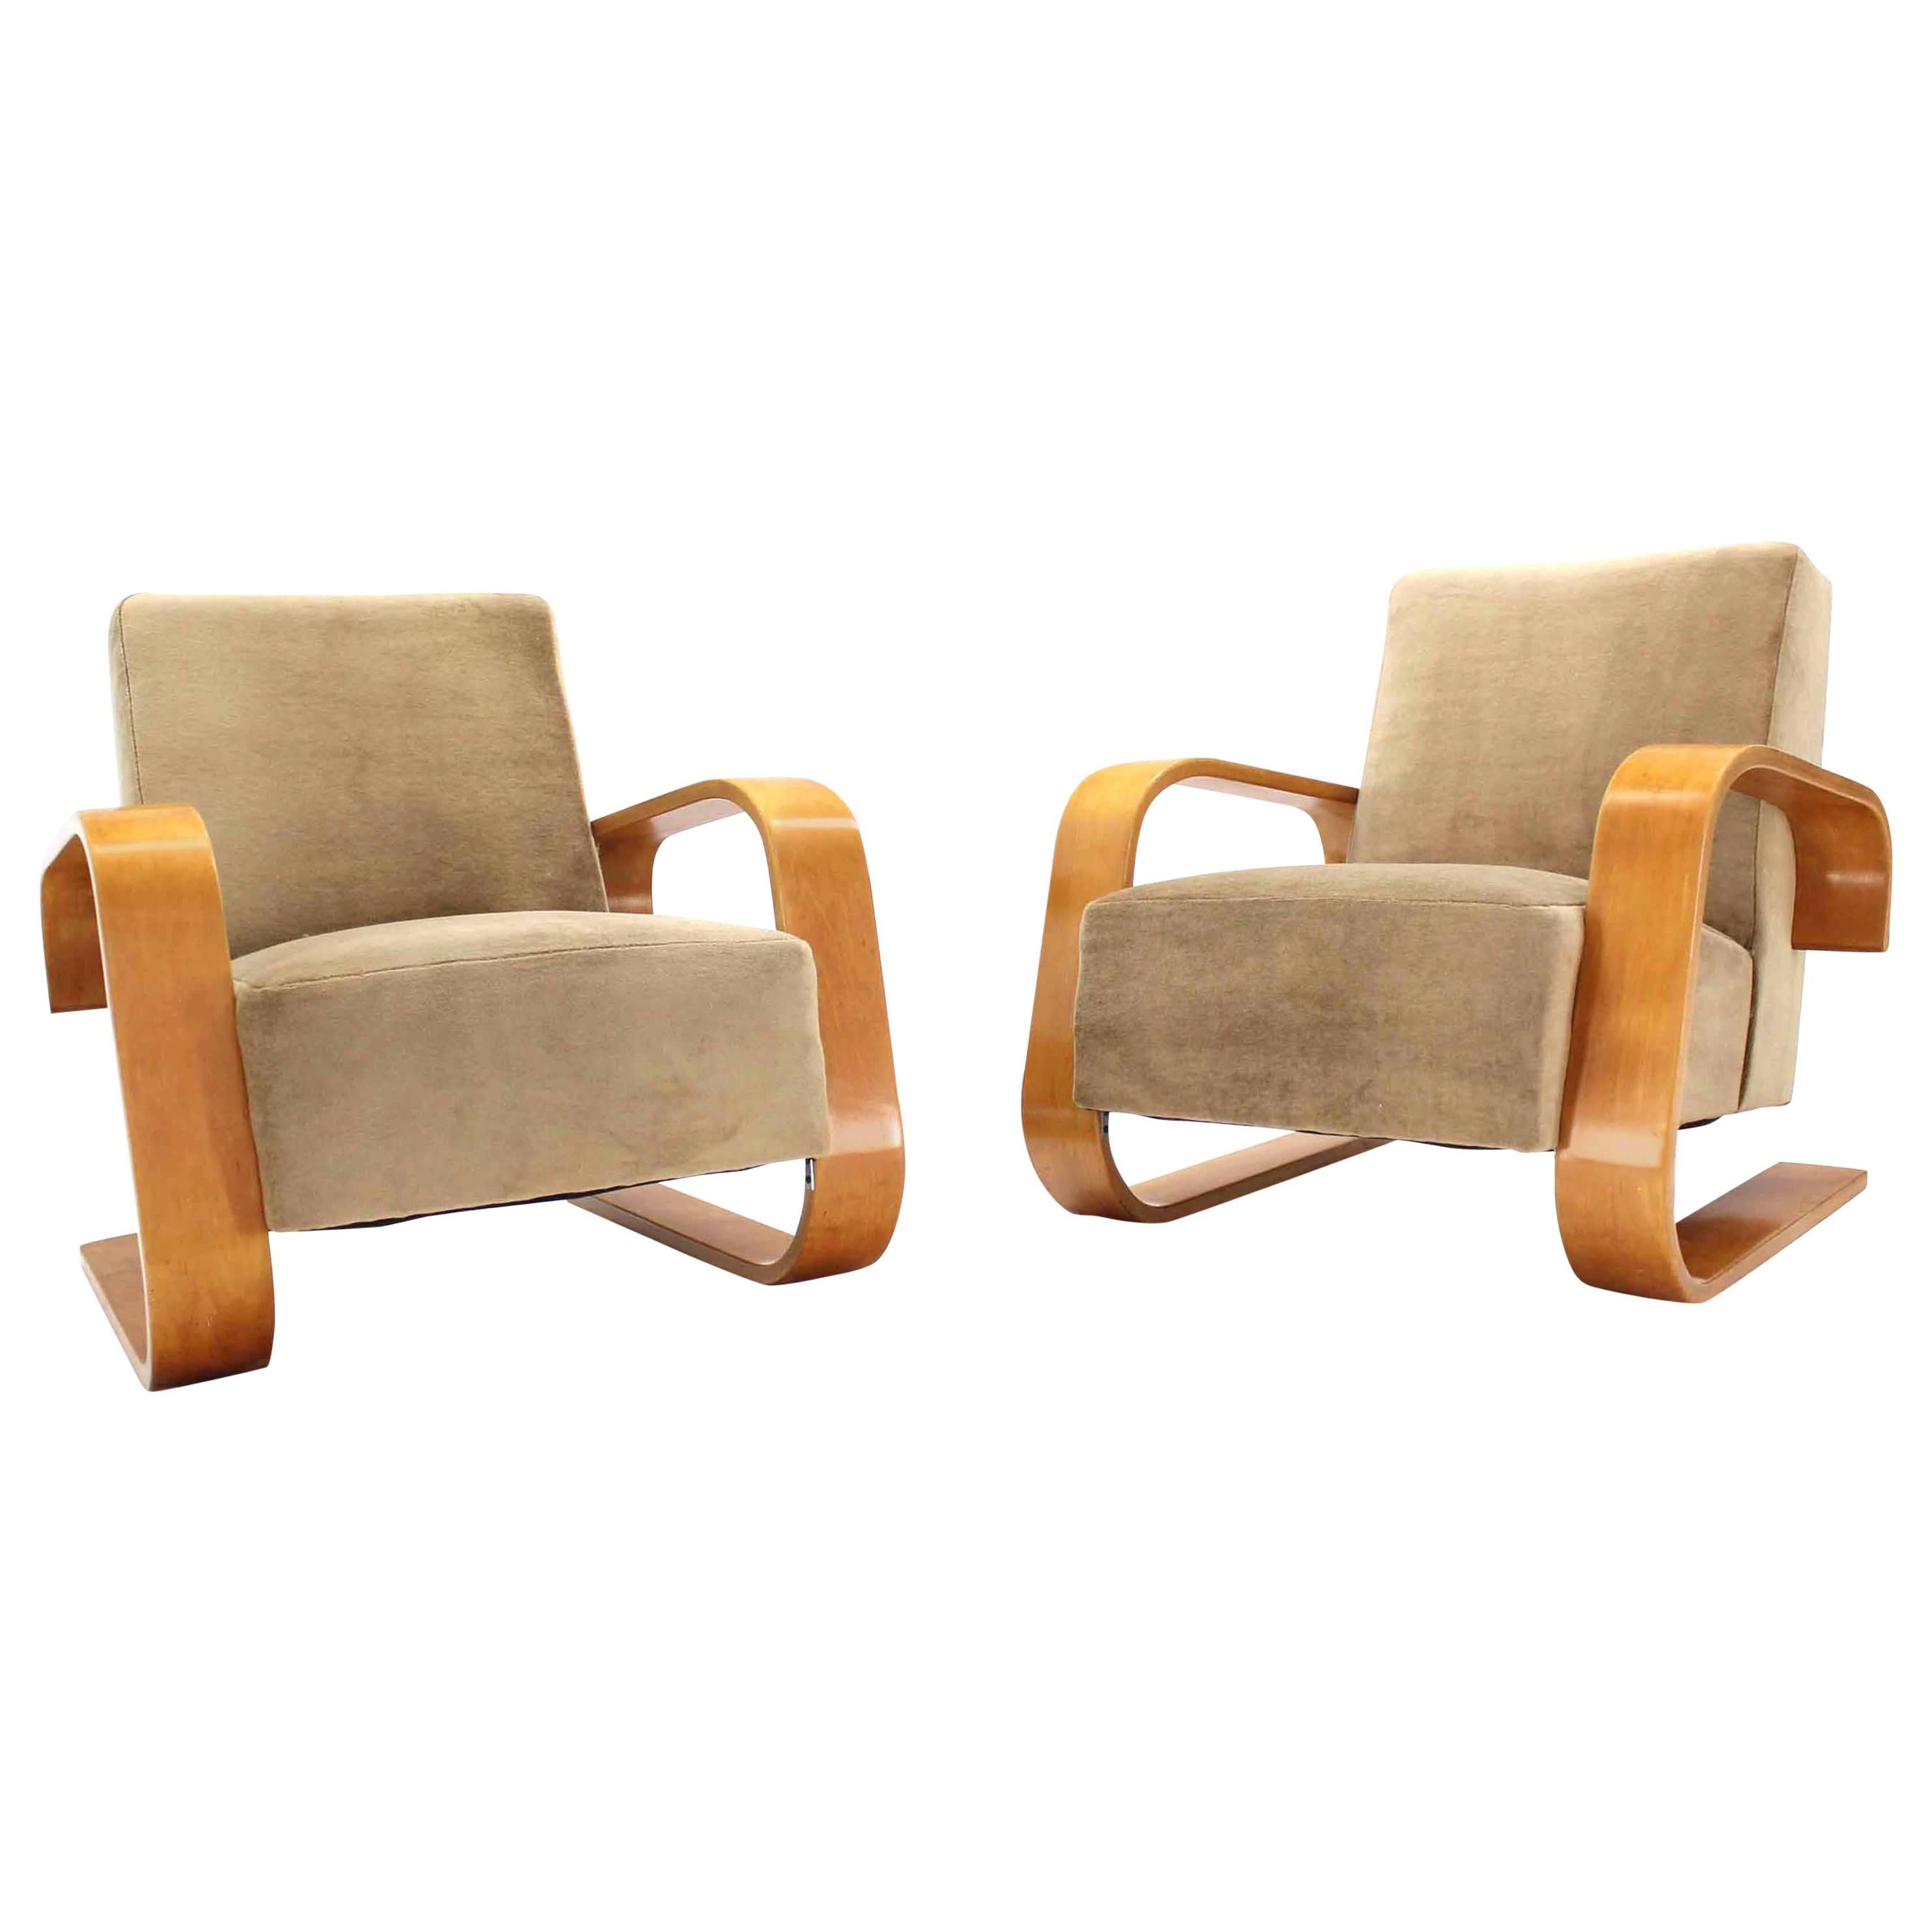 Early Alvar Aalto Tank Chairs Newly Upholstered in Mohair Fabric